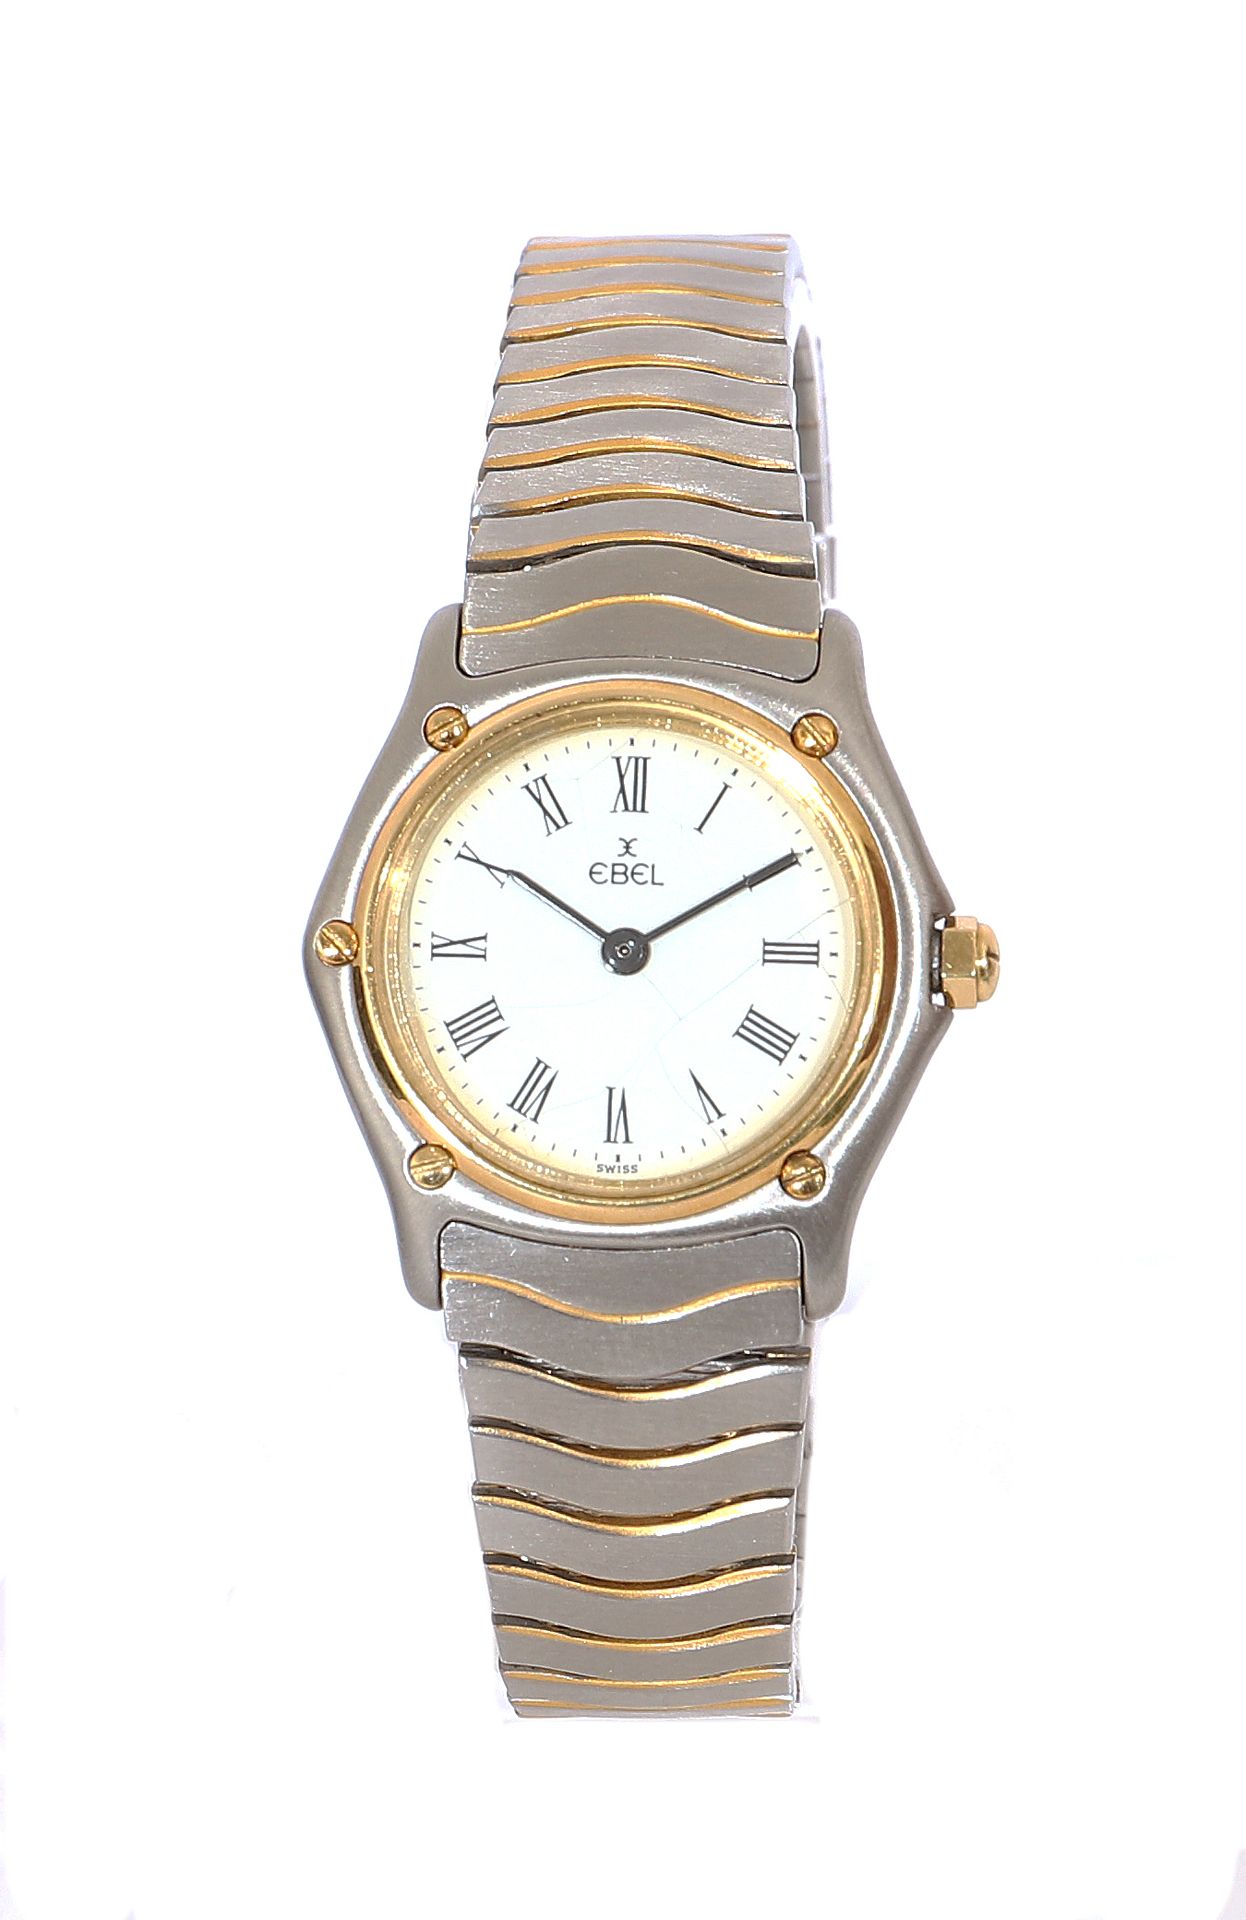 Null EBEL Sport Classic Circa 2000

Ref 20073

N° 181908

Ladies' gold and stain&hellip;